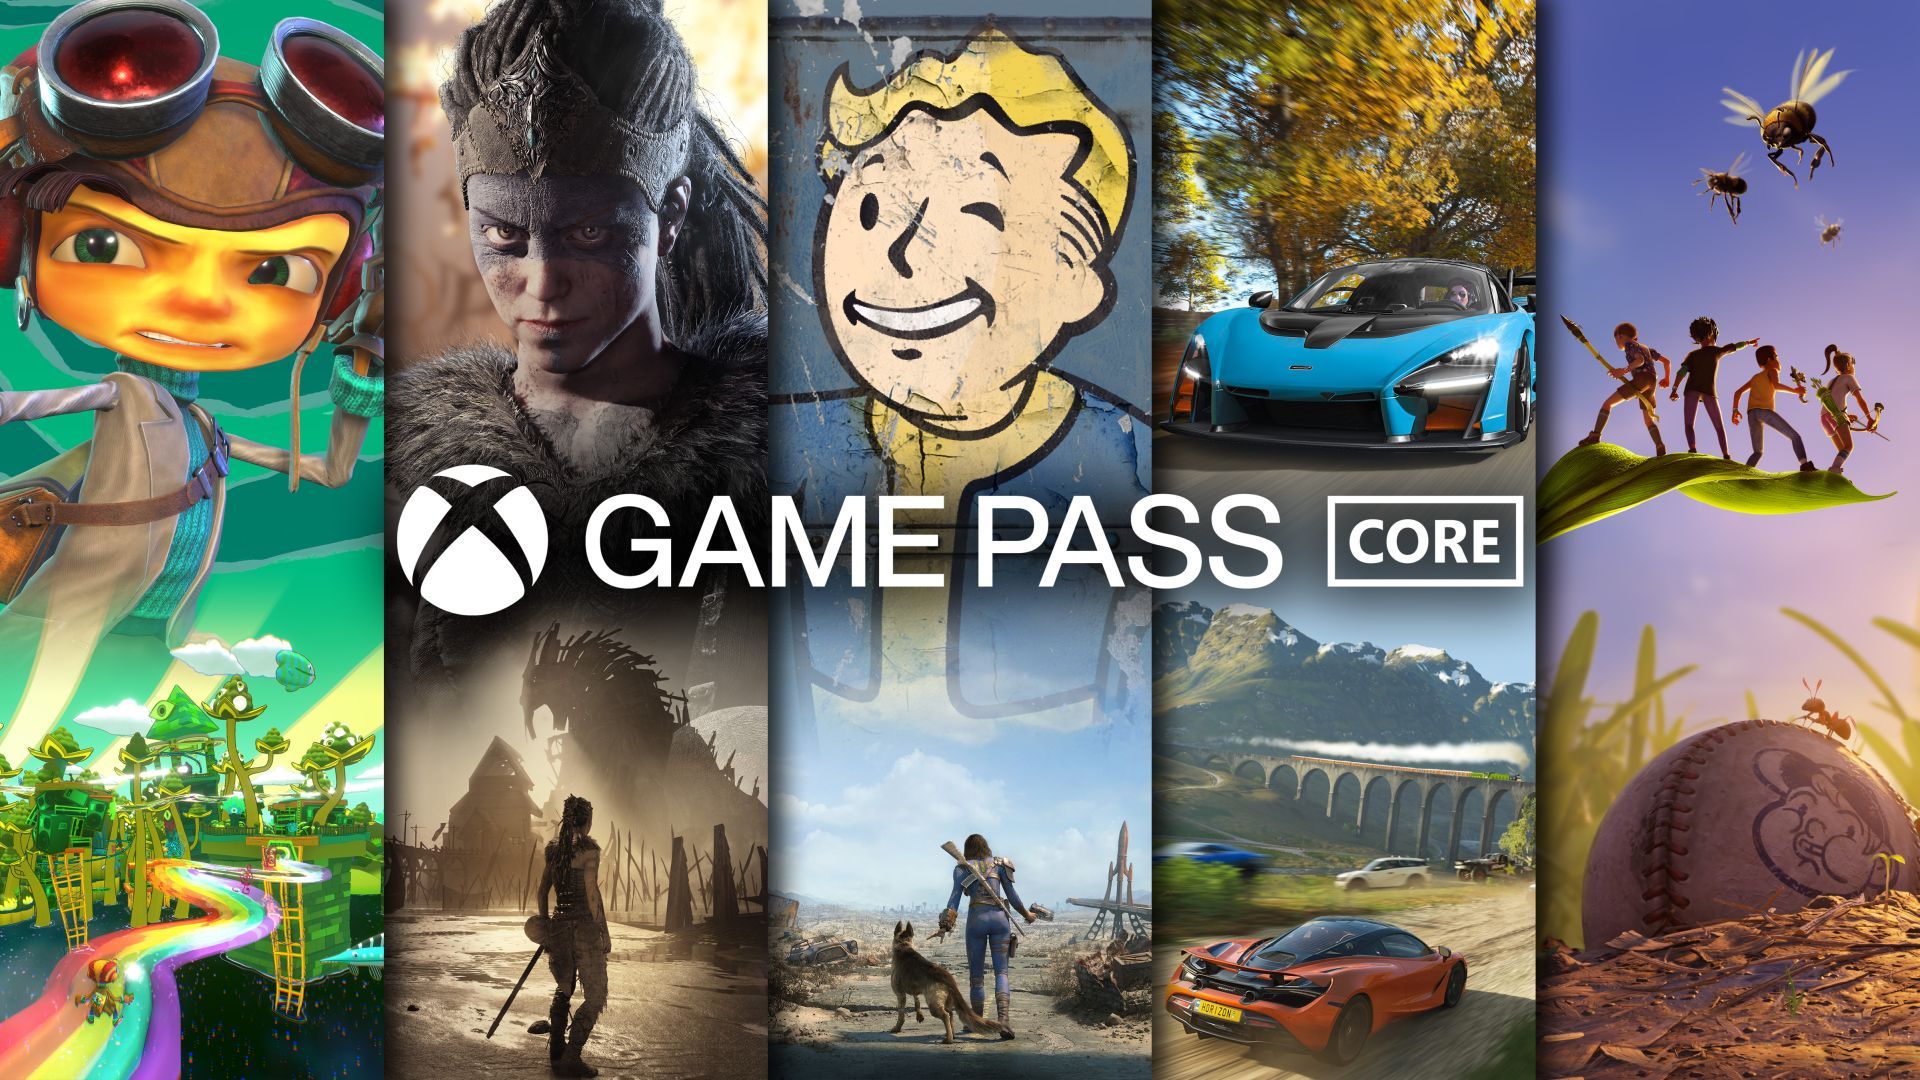 XBOX Game Pass Core 6 Months Subscription Card TR